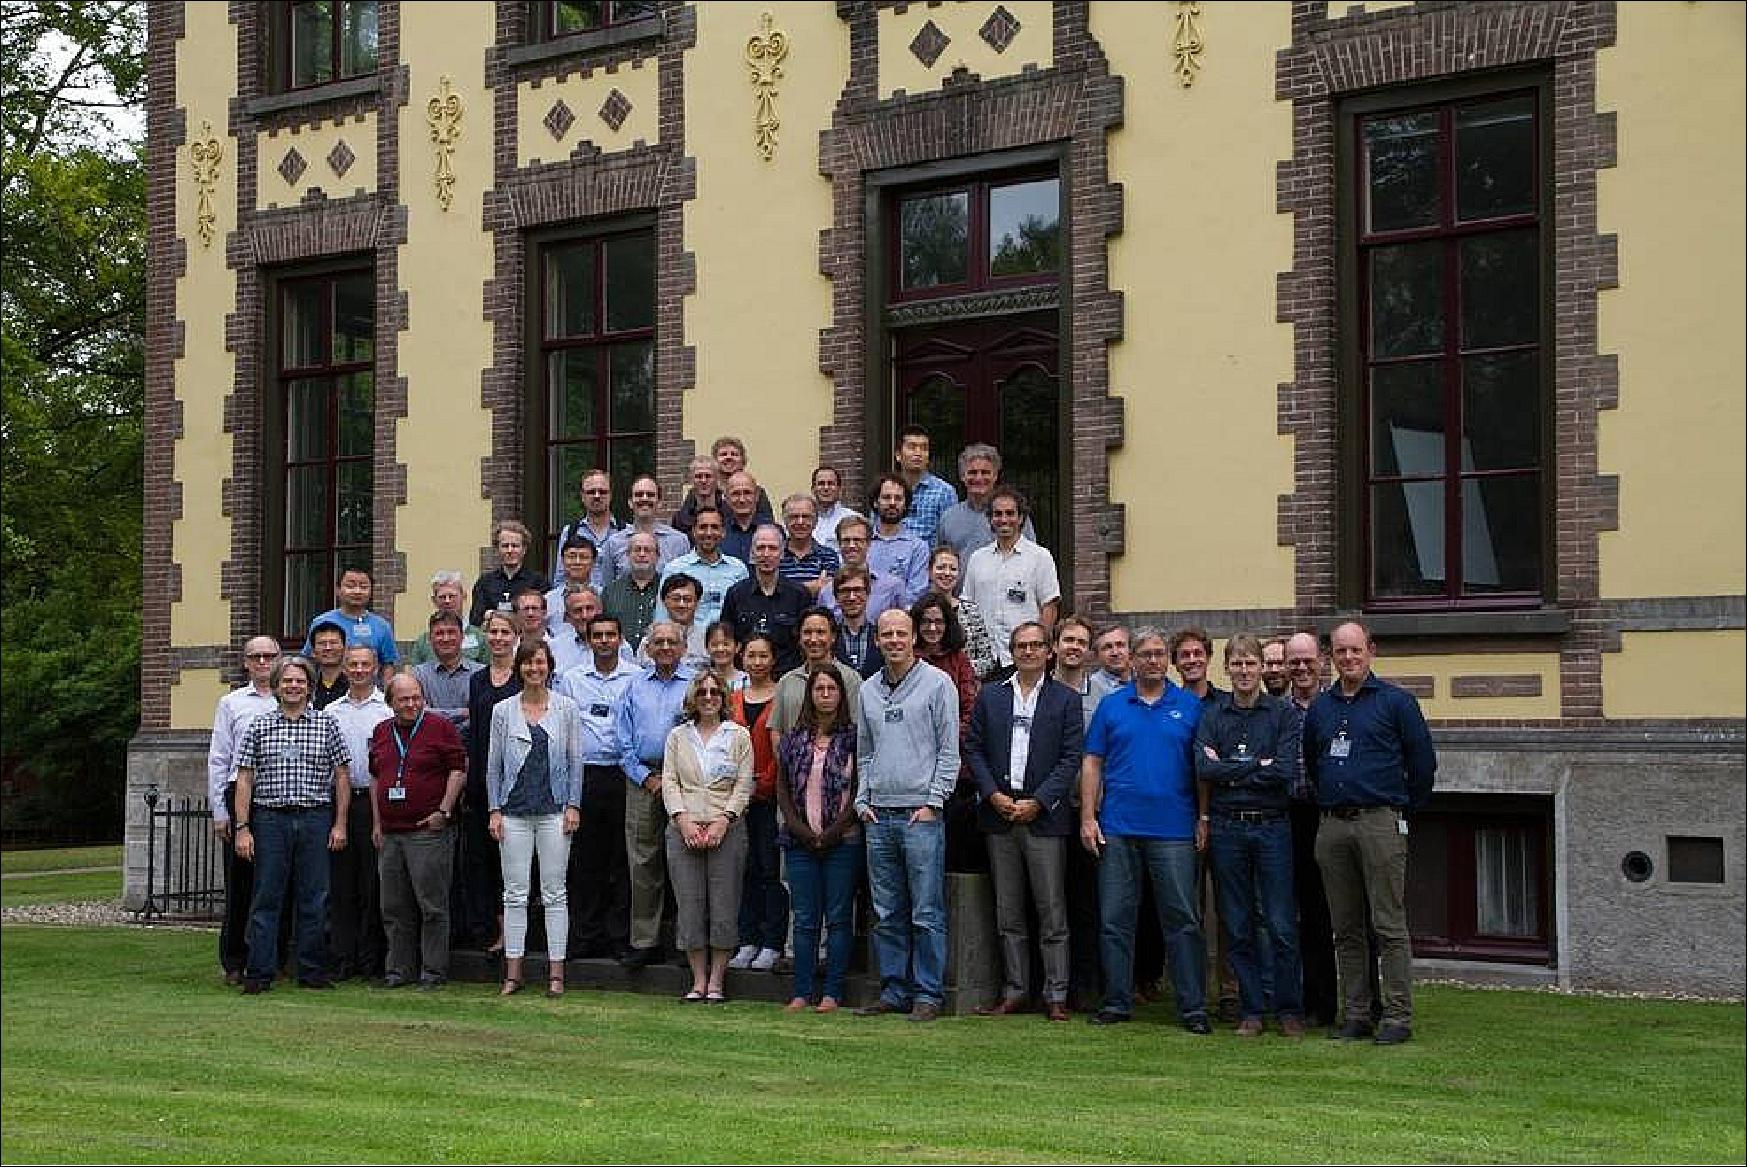 Figure 24: The multinational Ozone Monitoring Instrument (OMI) team recently received the 2018 William T. Pecora award for their achievements in Earth remote sensing. The team of Dutch, Finnish and American scientists studies gases and particles in the atmosphere to understand air quality, climate change and pollution (image credit: Maarten Sneep, Dutch Royal Meteorological Institute)